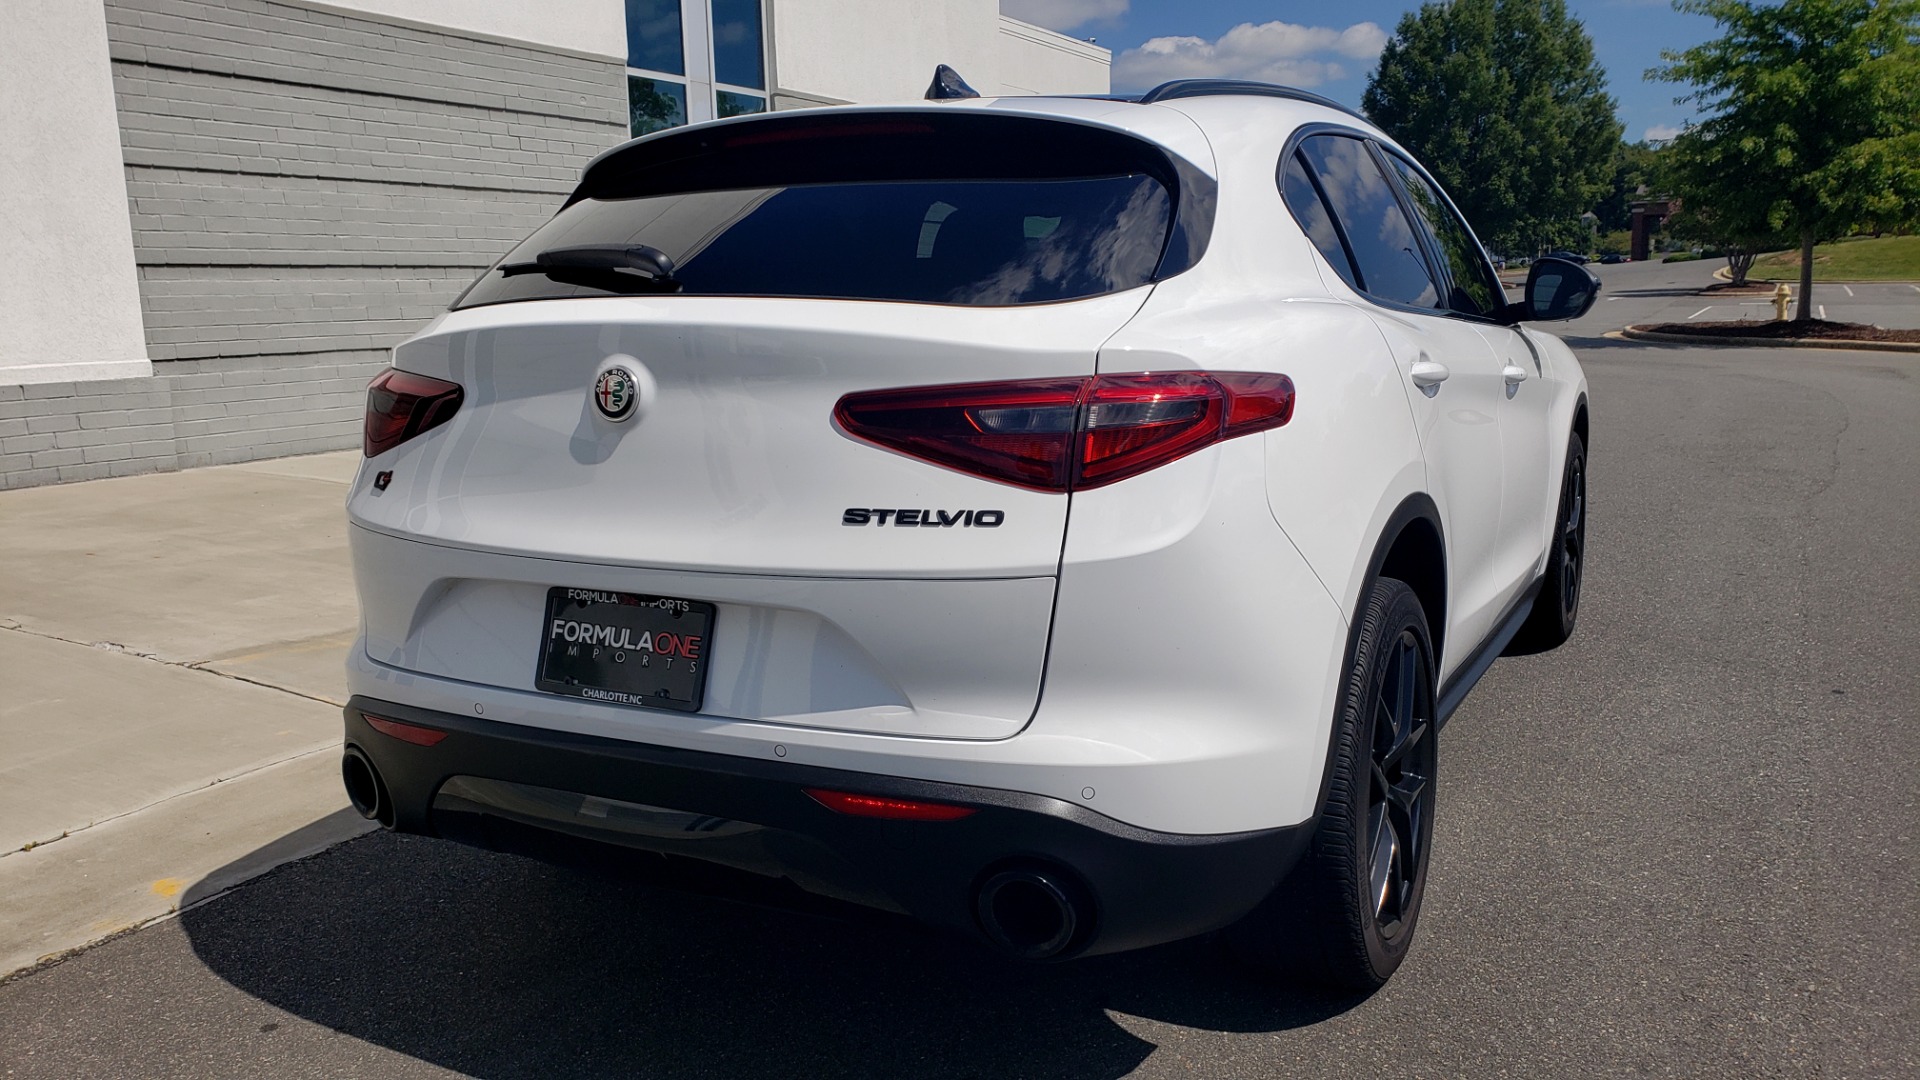 Used 2019 Alfa Romeo STELVIO TI SPORT AWD / 2.0L TURBO / 8-SPD AUTO / DRVR ASST / REARVIEW for sale Sold at Formula Imports in Charlotte NC 28227 2